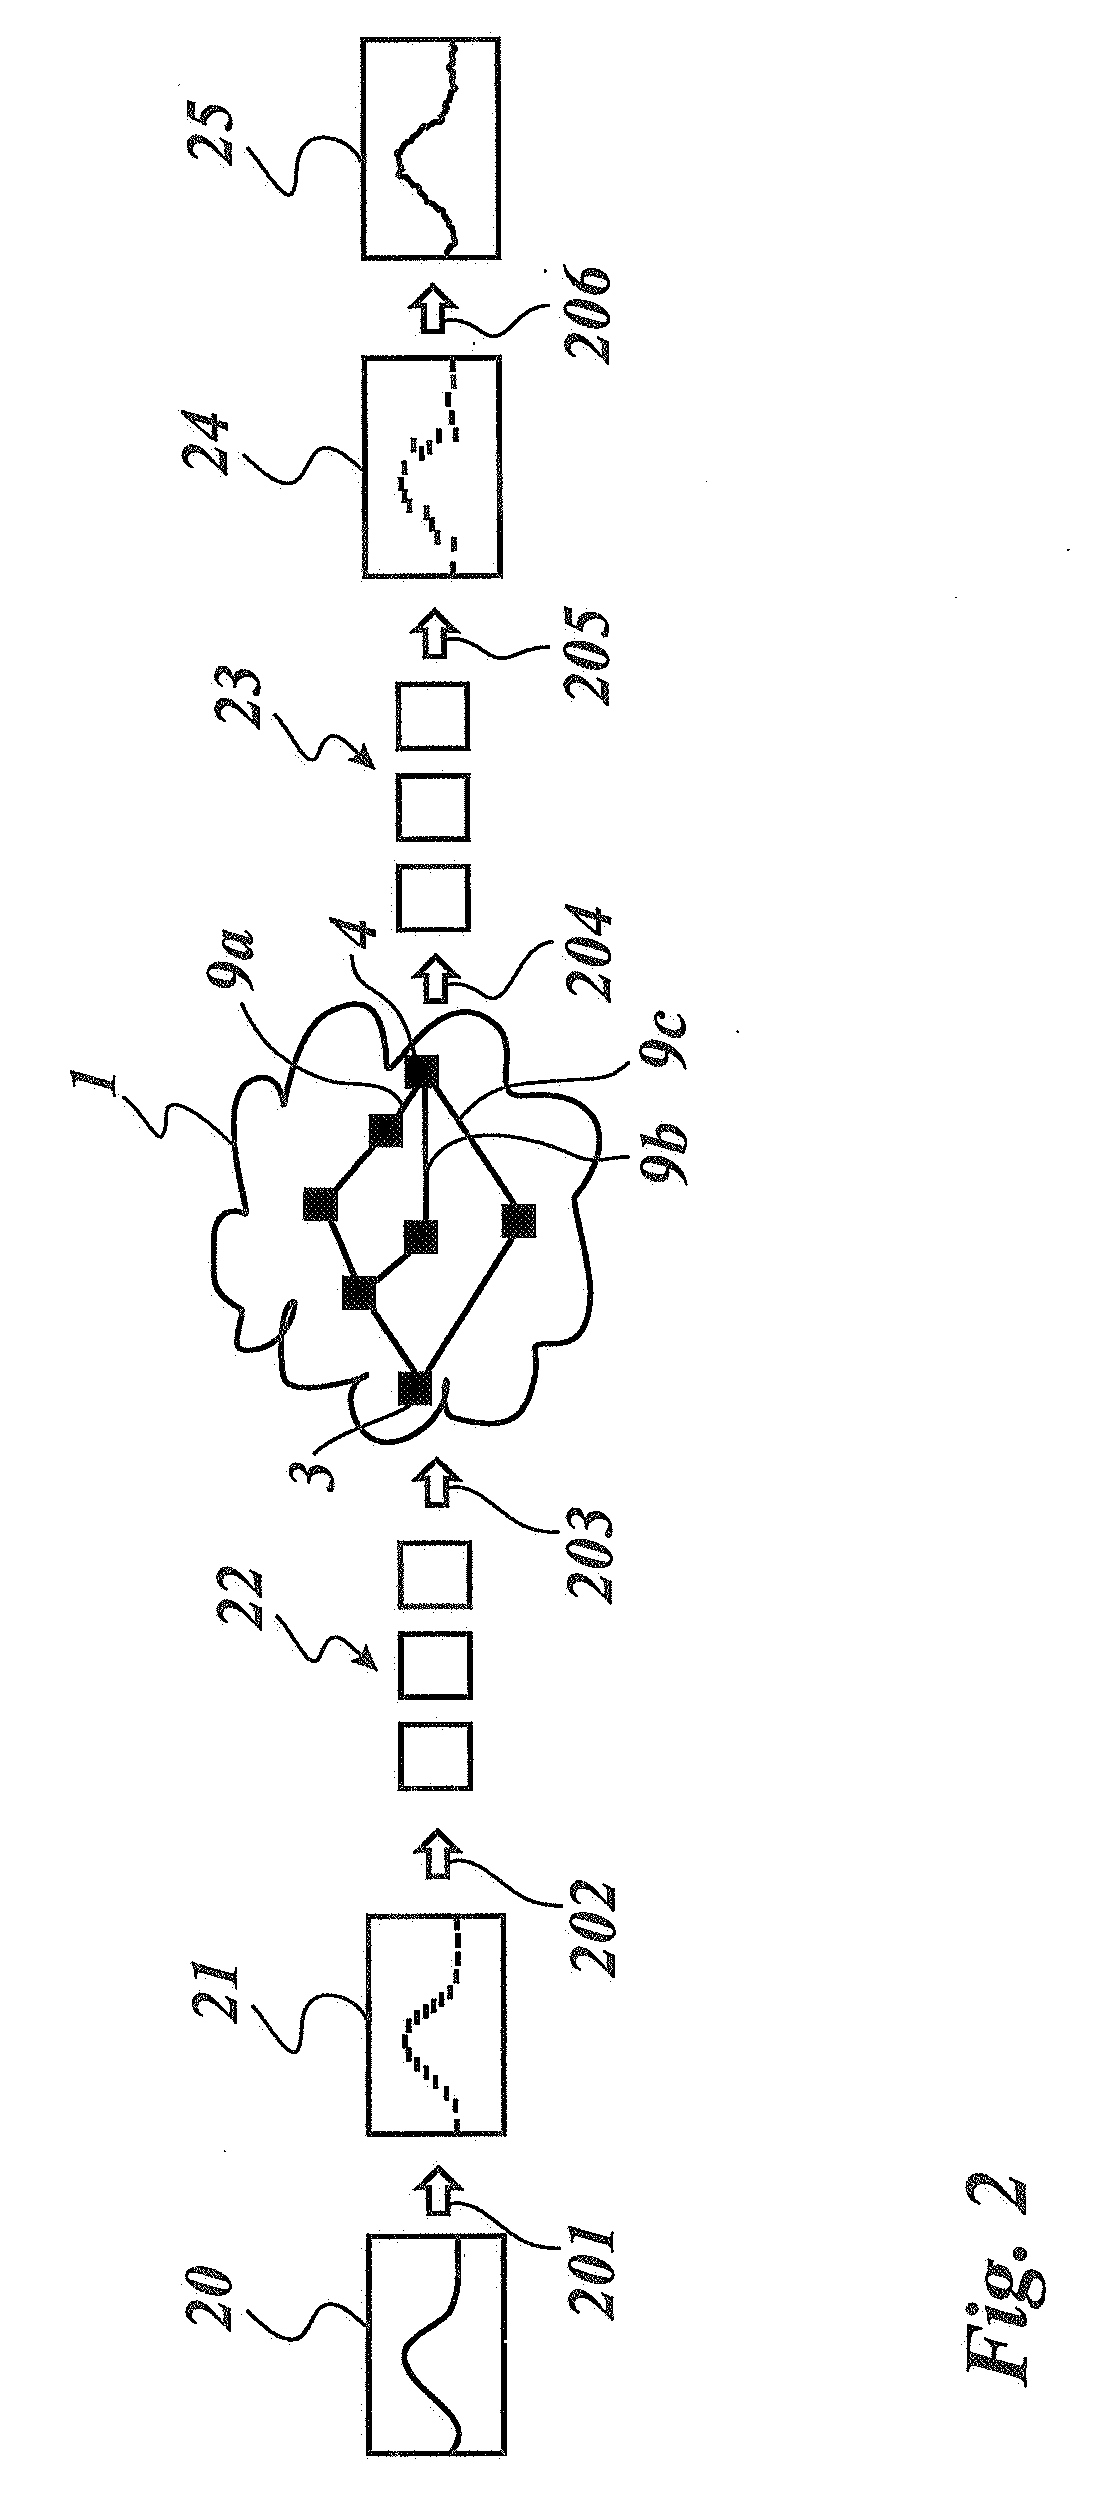 Method of monitoring the quality of a realtime communication